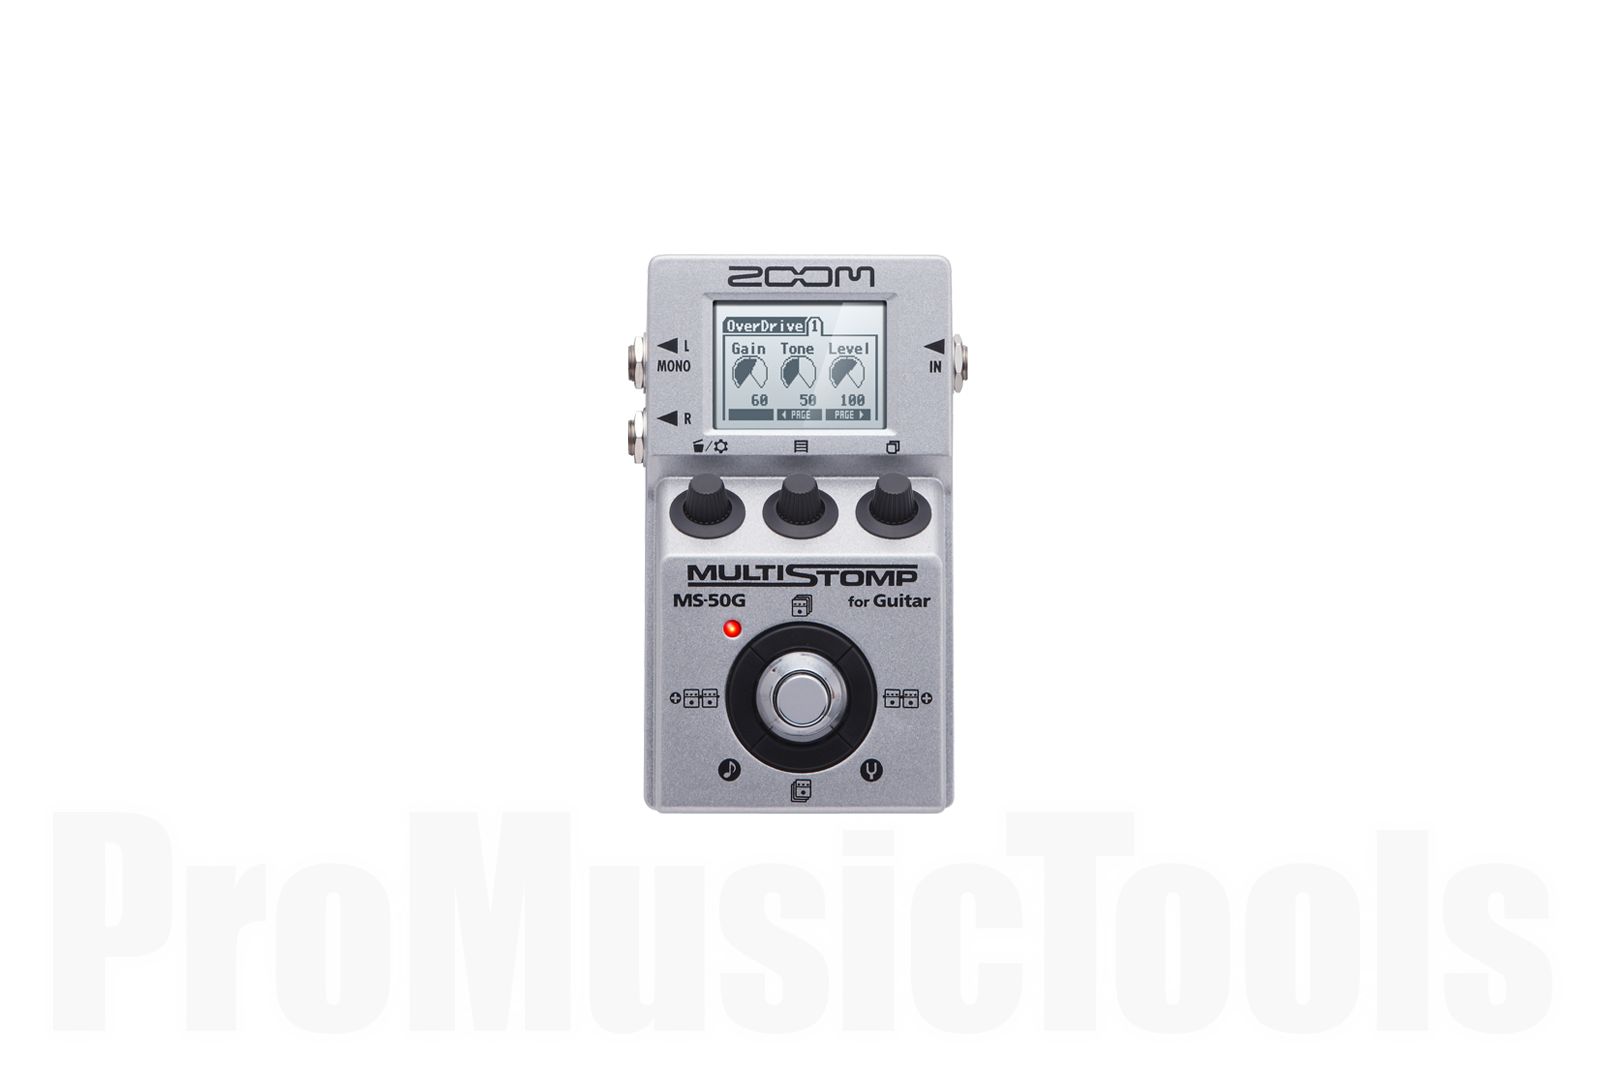 ZOOM MULTI STOMP MS-50G for Guitar 品質のいい - ギター